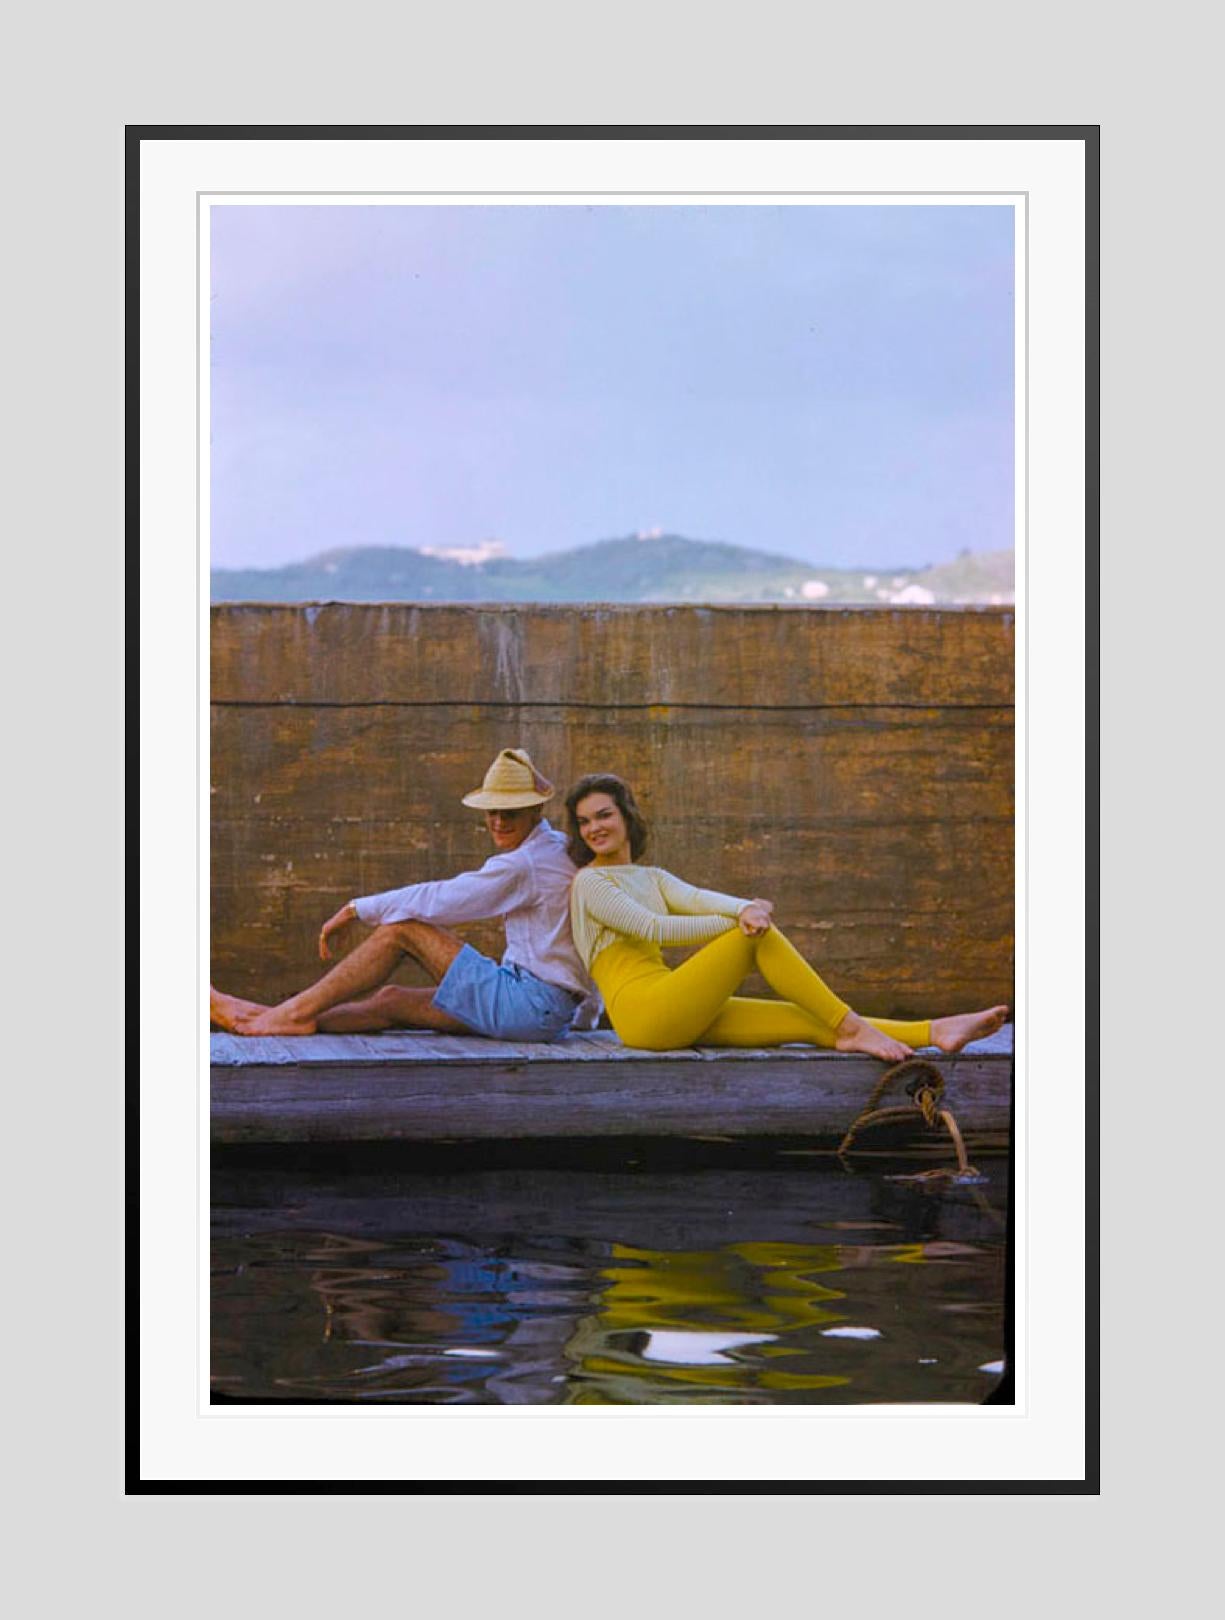 Waterside In Bermuda 

1960

Fashionable couple on a quayside in Bermuda

by Toni Frissell

48 x 72 “ / 121 x 182 cm - paper size
Archival pigment print
unframed 
(framing available see examples - please enquire) 

Limited Signature Stamped Edition